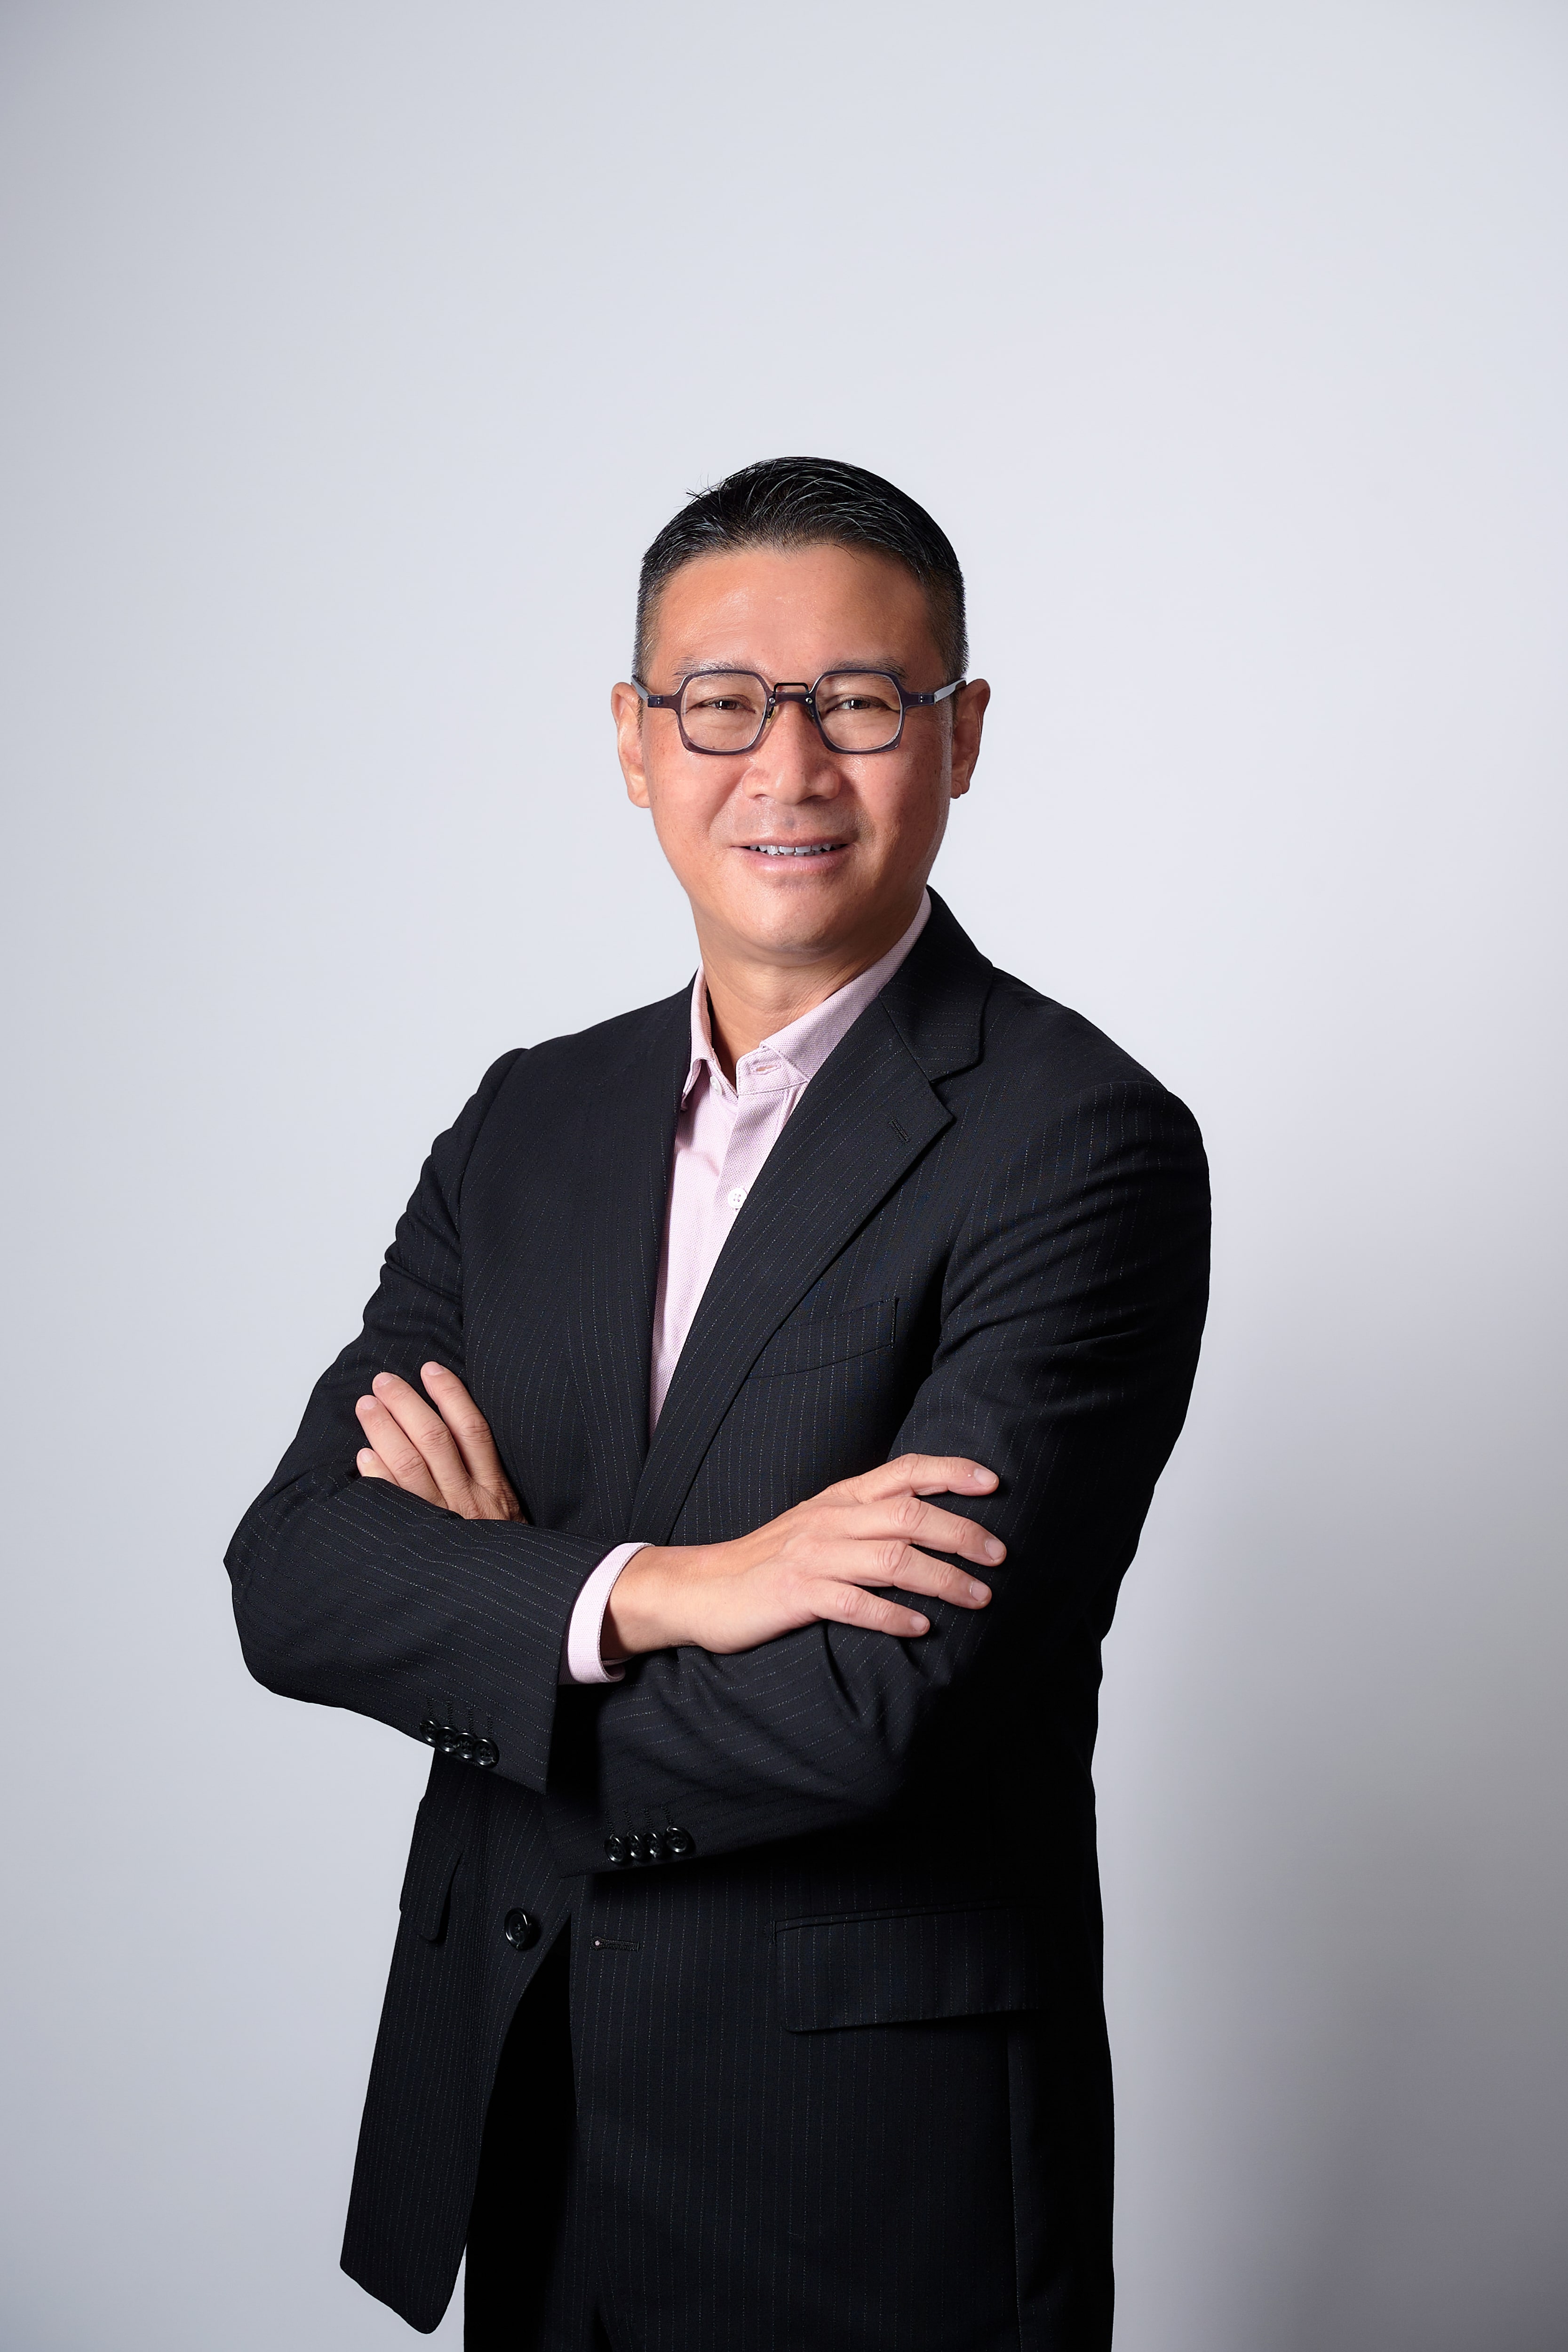 Wing Law, CEO of Asia, AtkinsRéalis